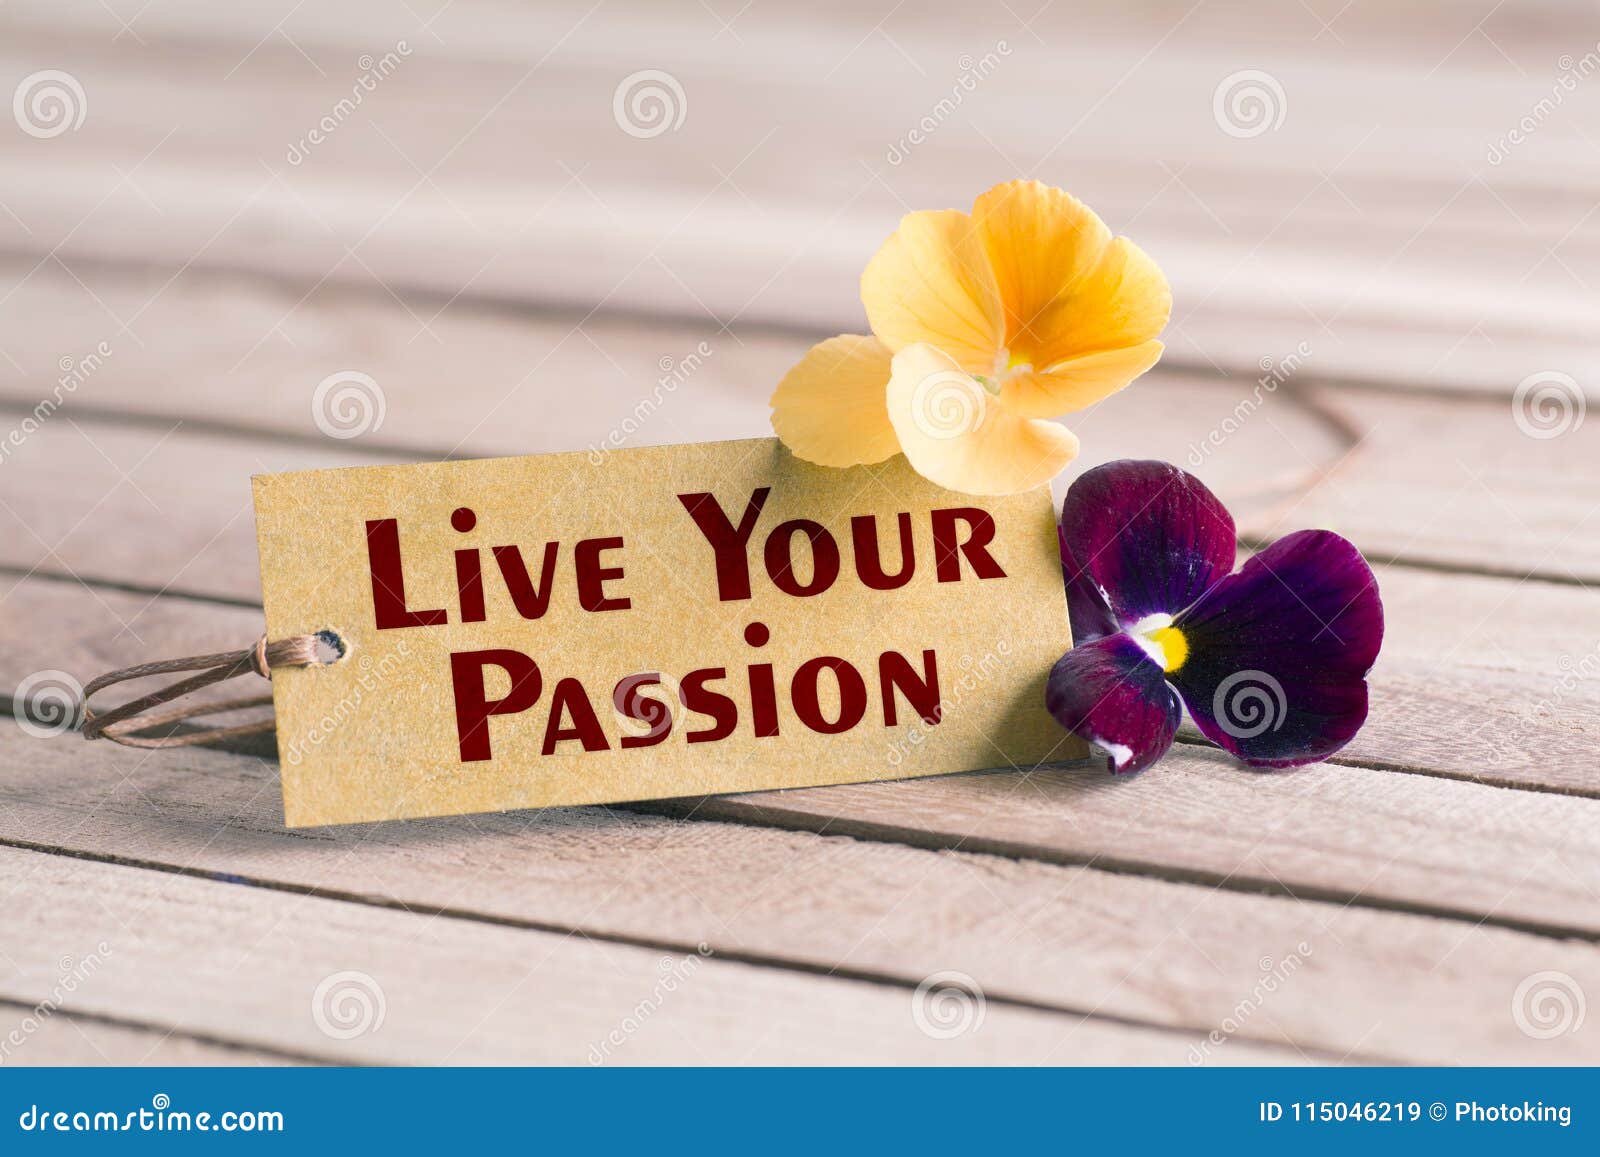 live your passion tag